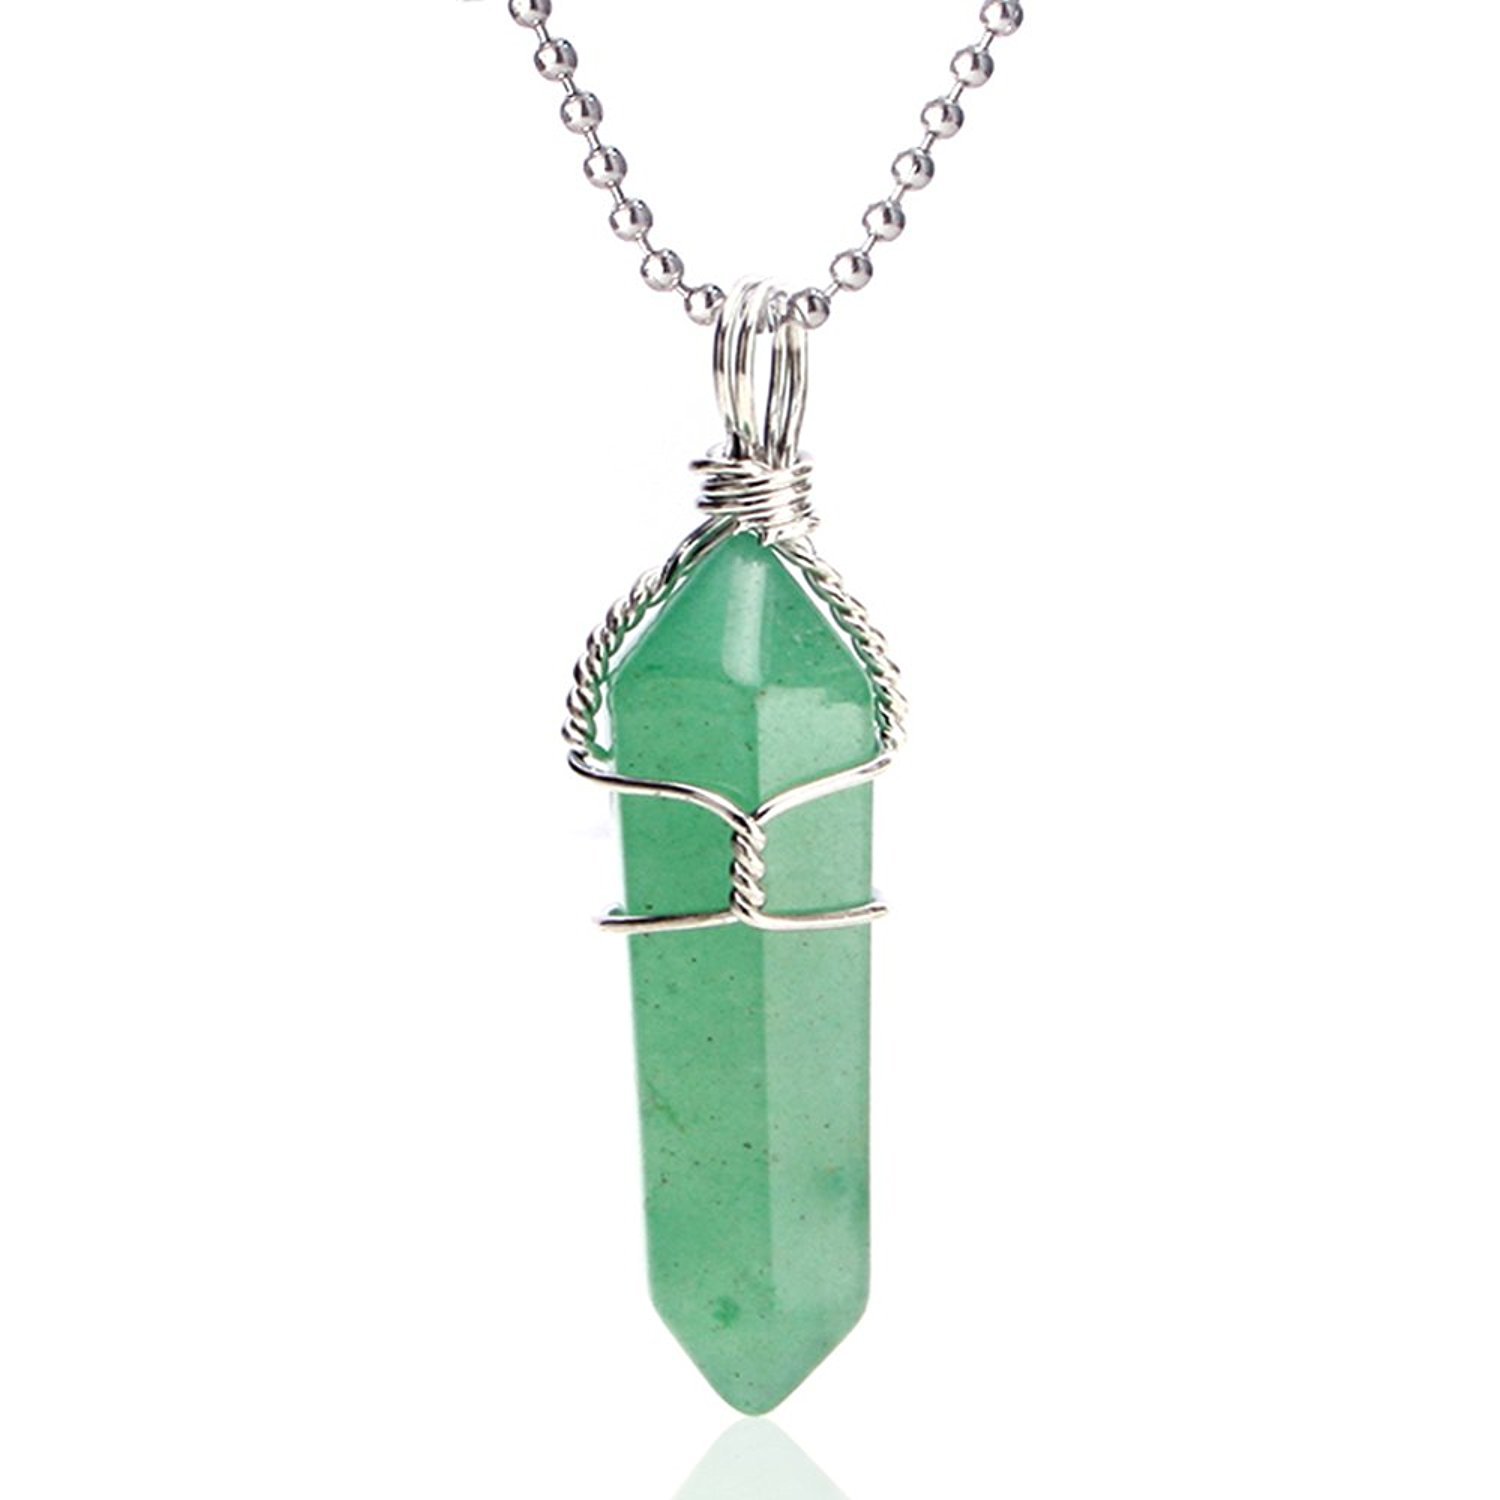 Details about   Natural jade carved teardrop-shaped pendant without chain 